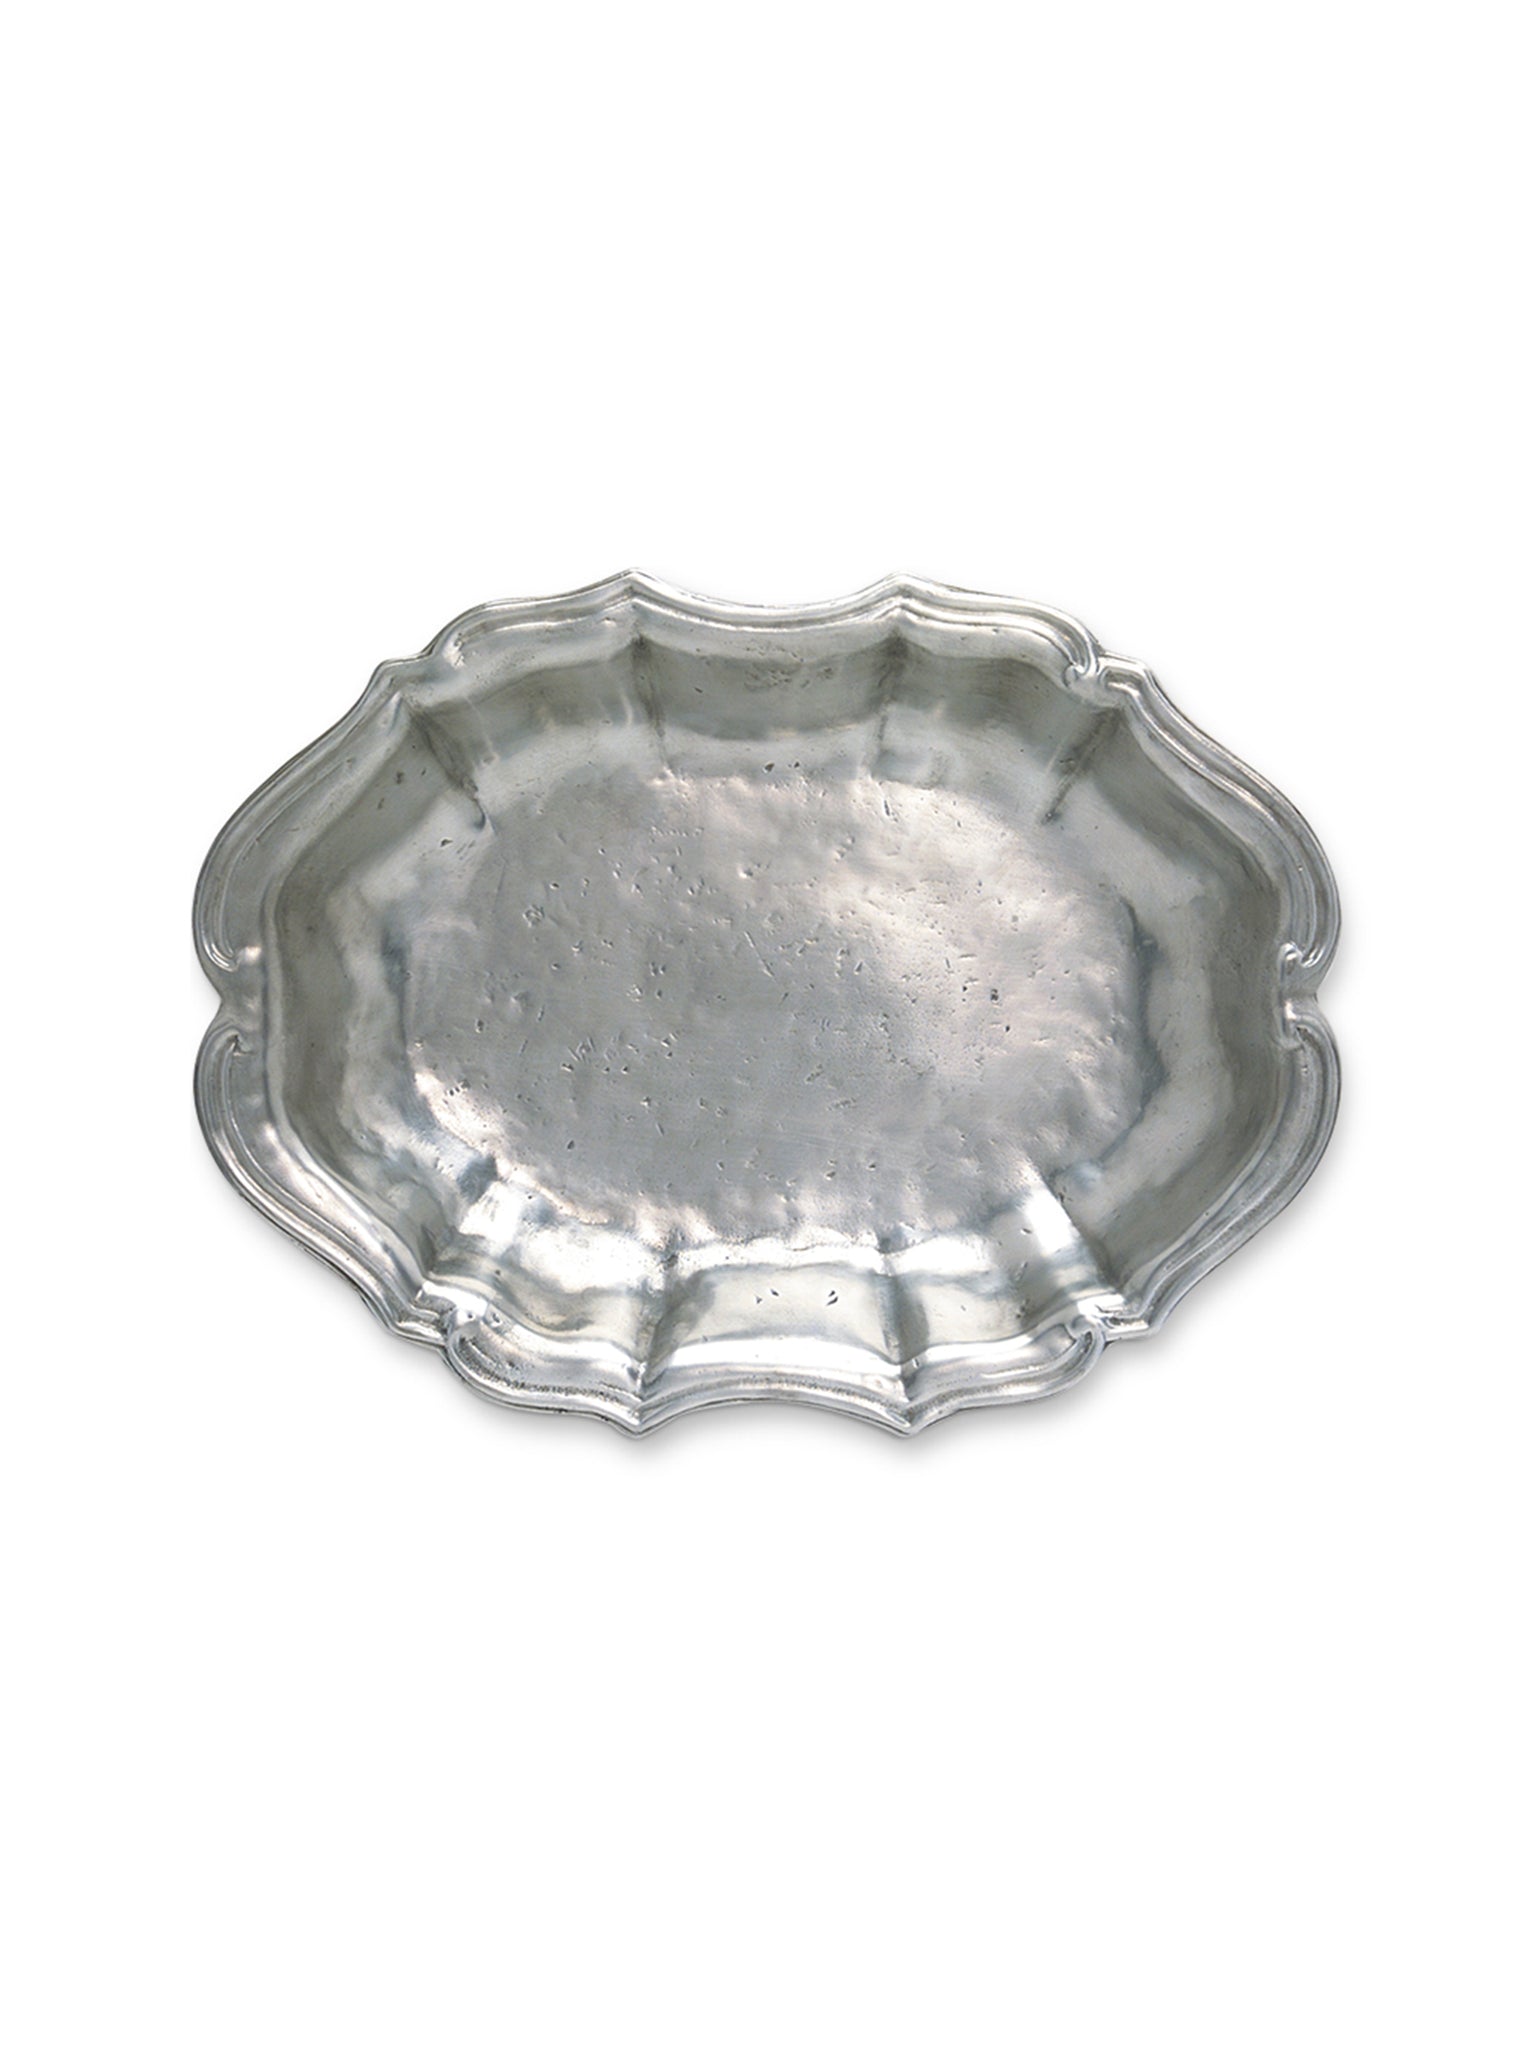 MATCH Pewter Queen Anne Oval Bowl Weston Table